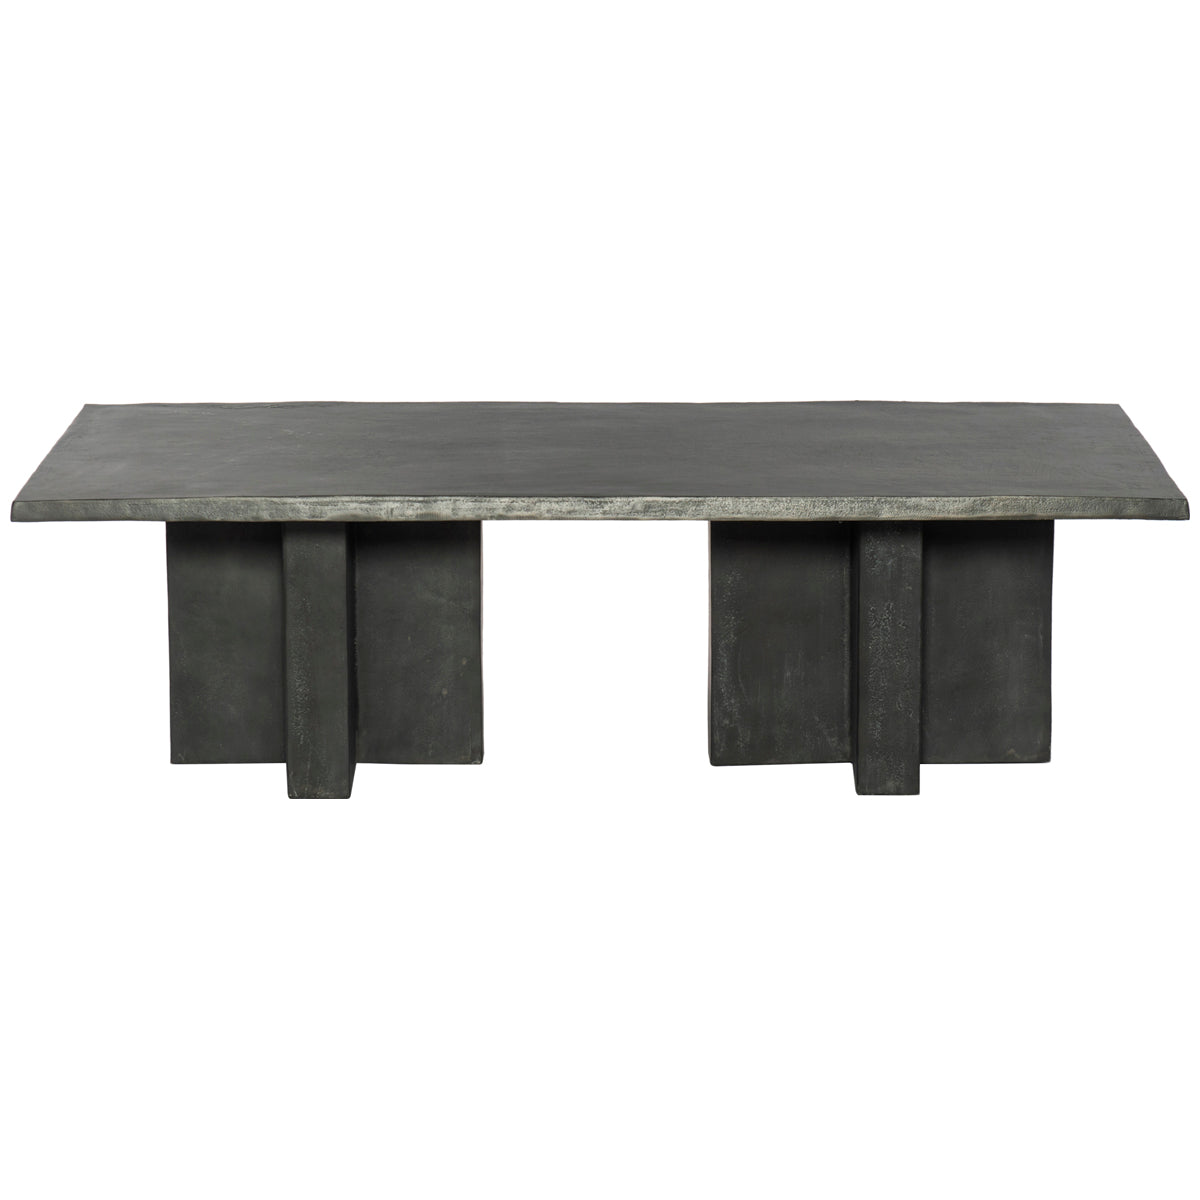 Four Hands Marlow Terrell Outdoor Coffee Table - Aged Grey